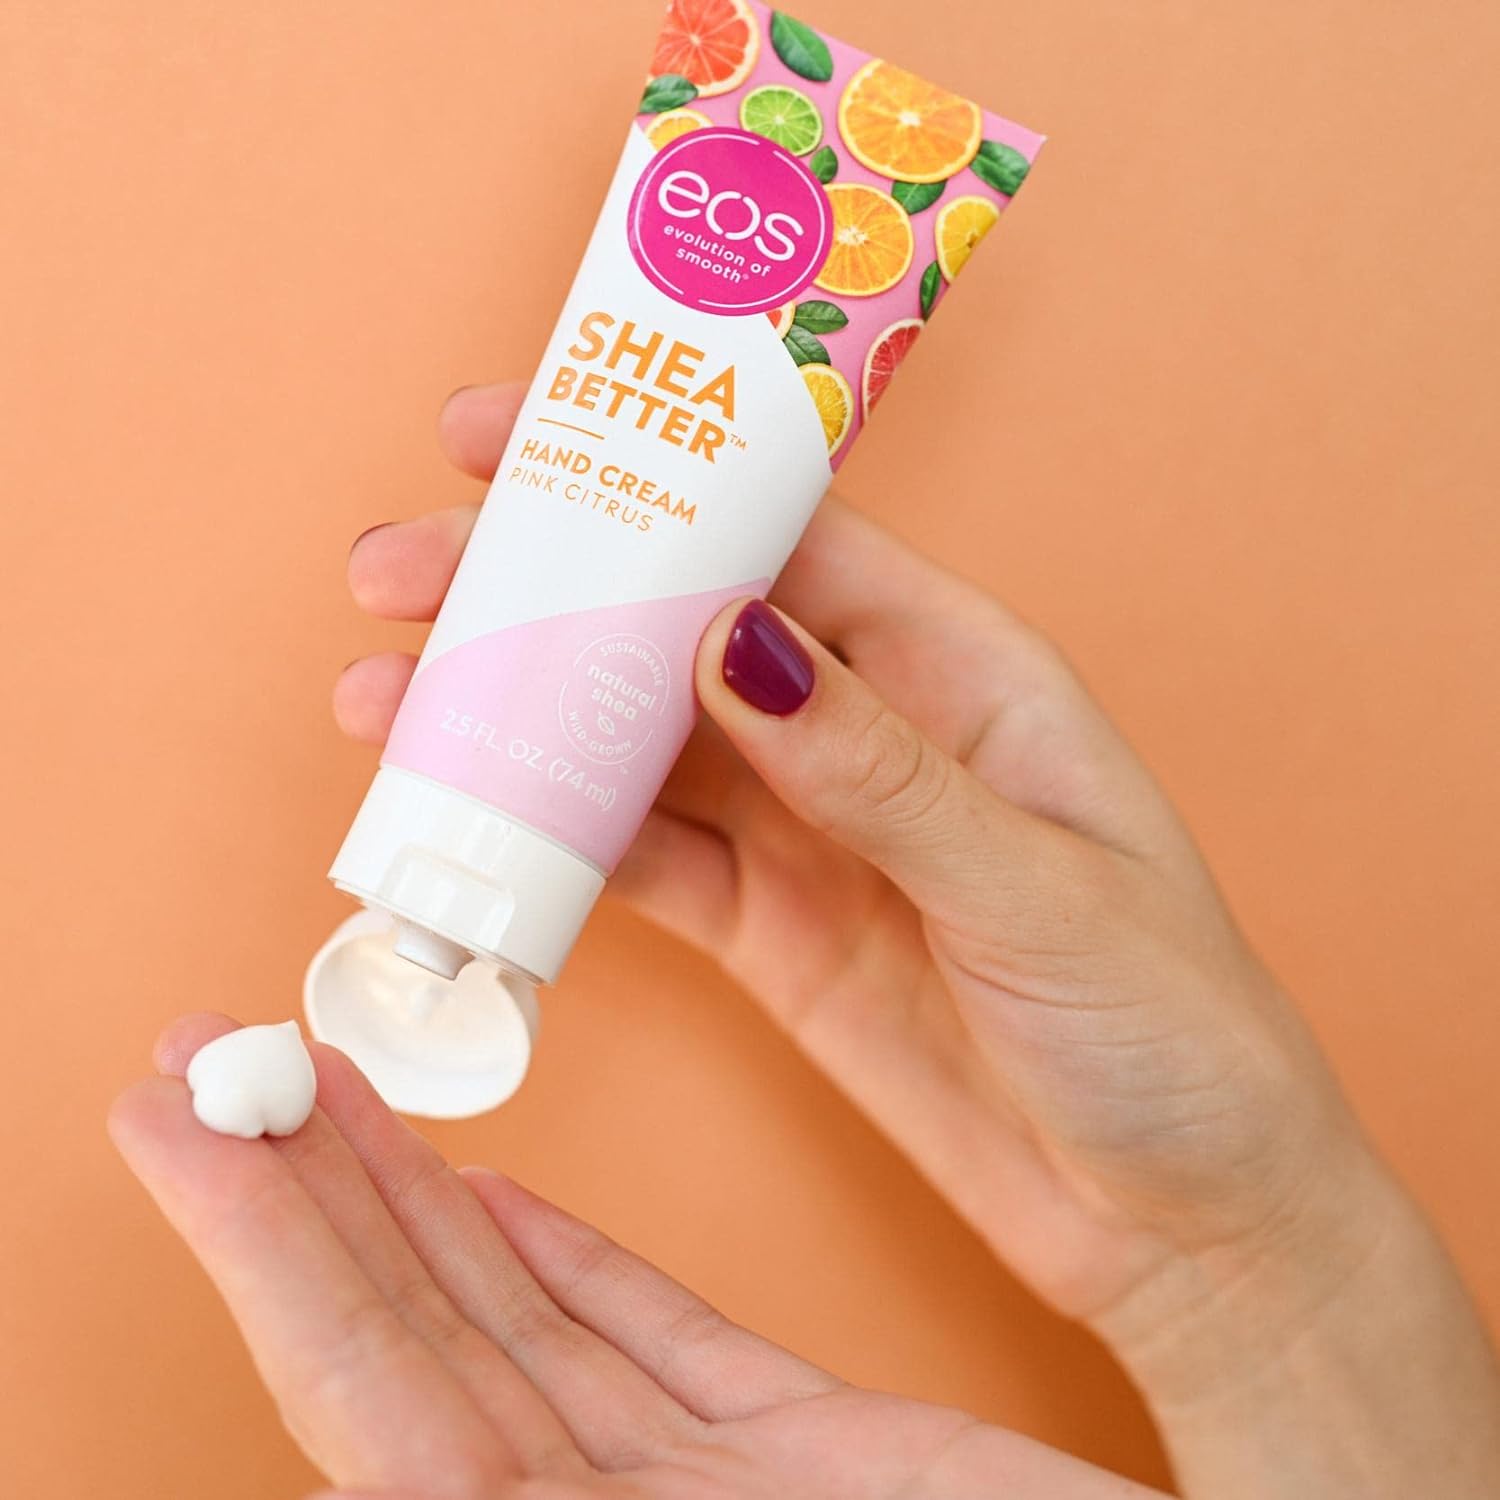 eos Hand Cream - Pink Citrus | Natural Shea Butter Hand Lotion and Skin Care | 24 Hour Hydration with Oil | 2.5 oz,2040872 : Beauty & Personal Care